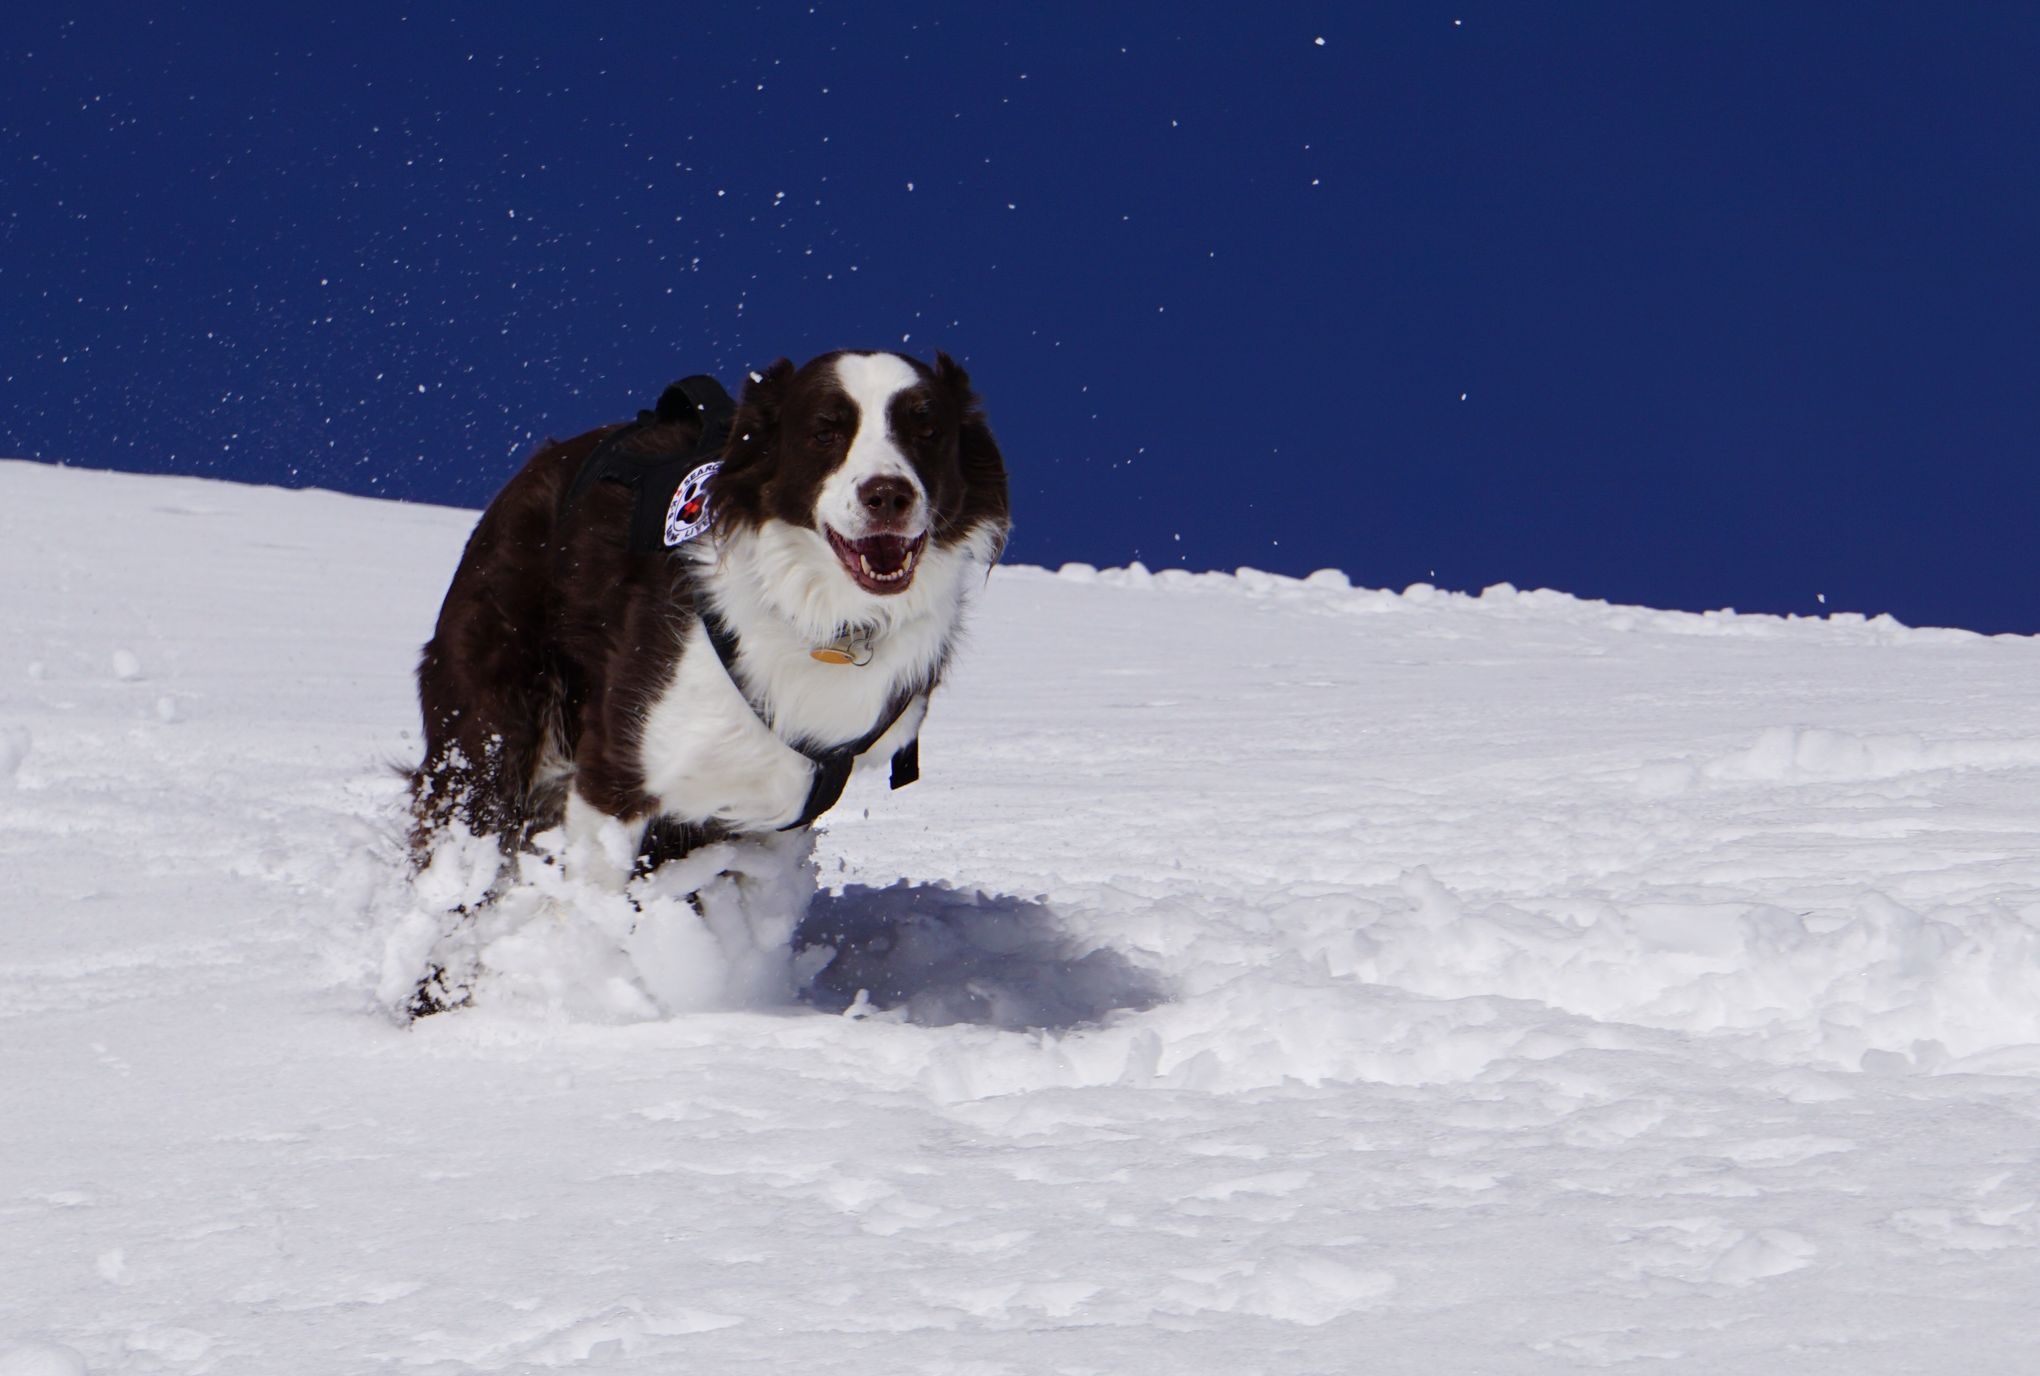 In an avalanche, rescue dogs are your best chance